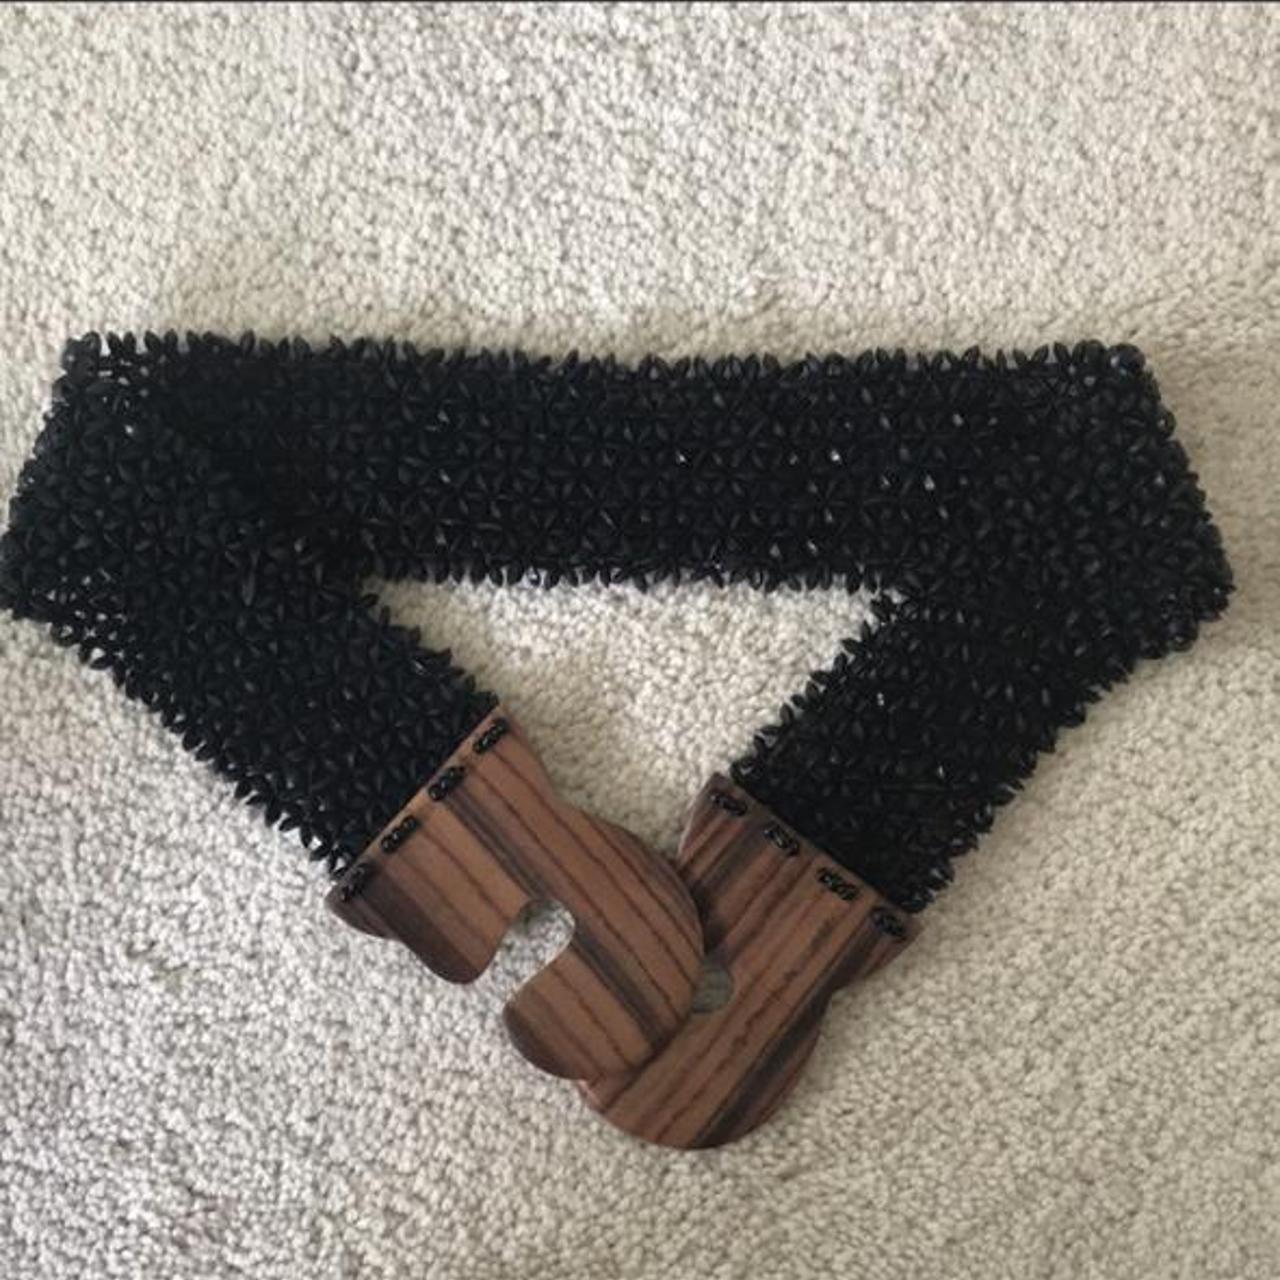 Product Image 2 - Anthropologie beaded belt
Size S/M. Never